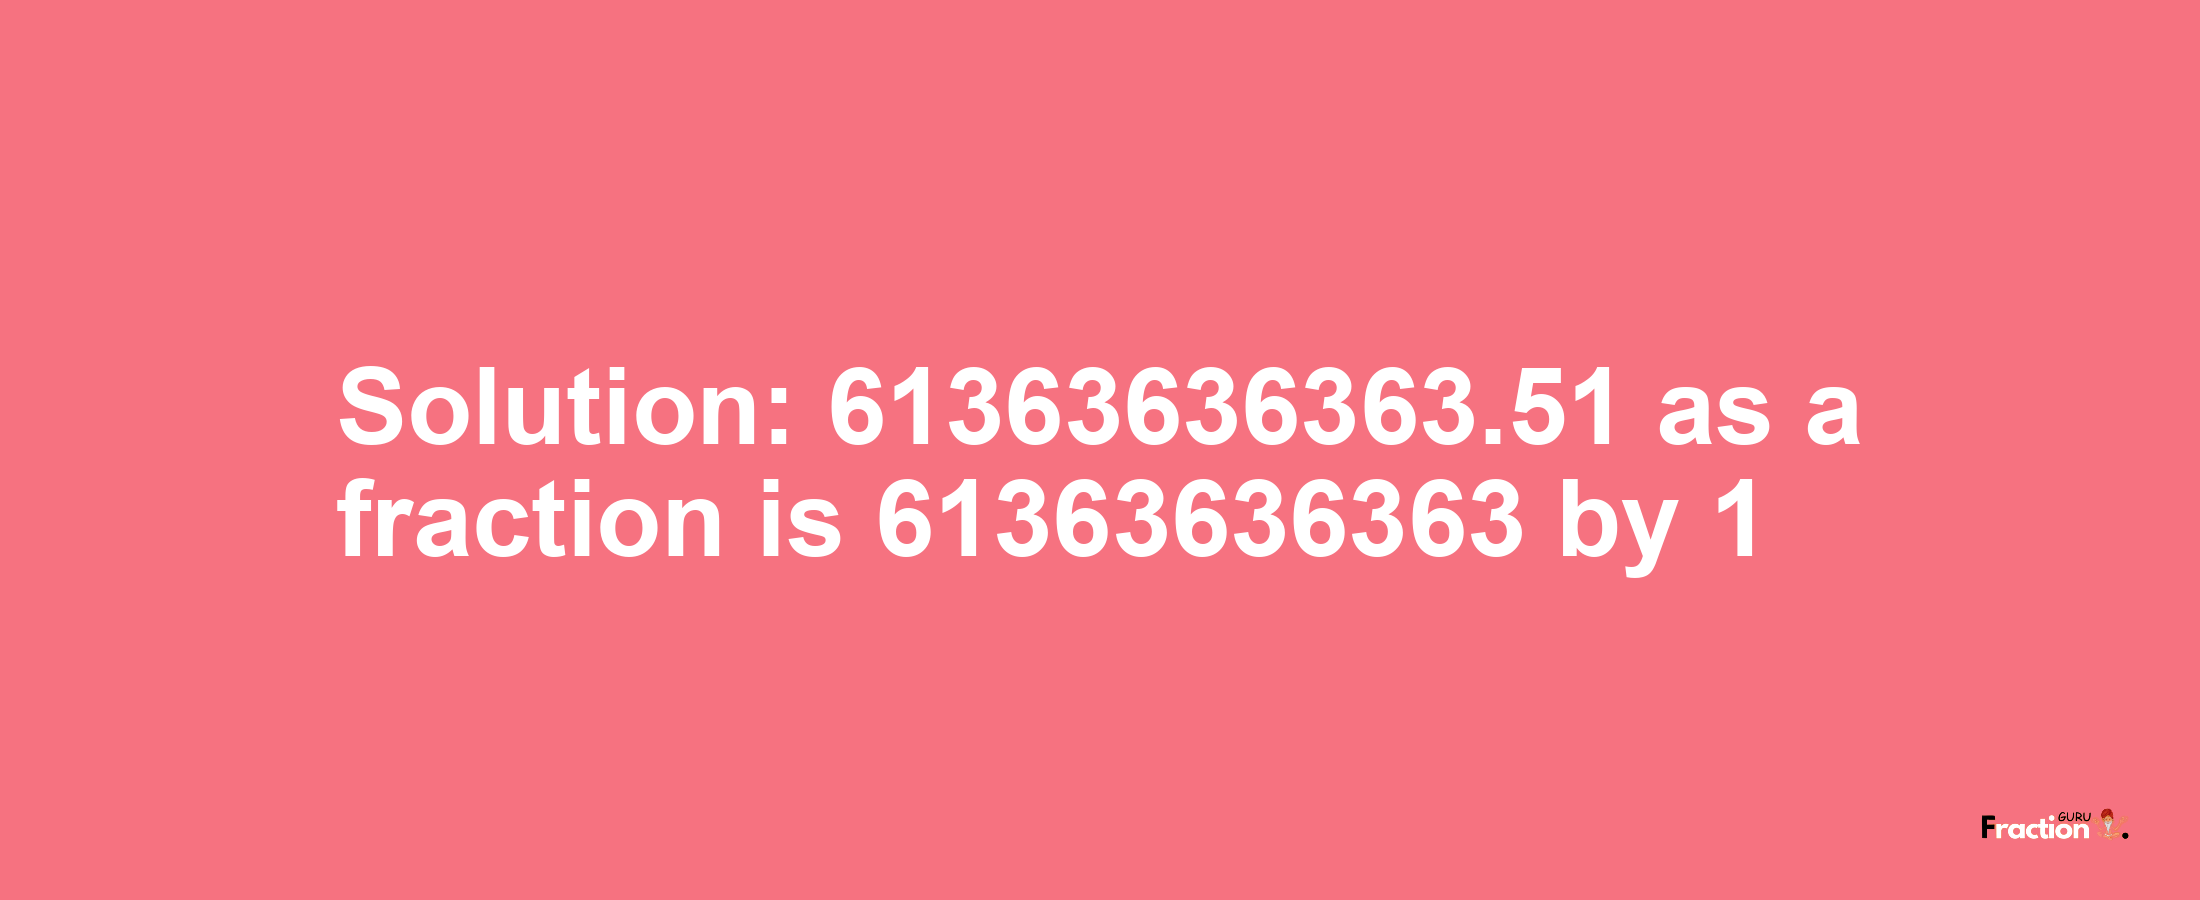 Solution:61363636363.51 as a fraction is 61363636363/1